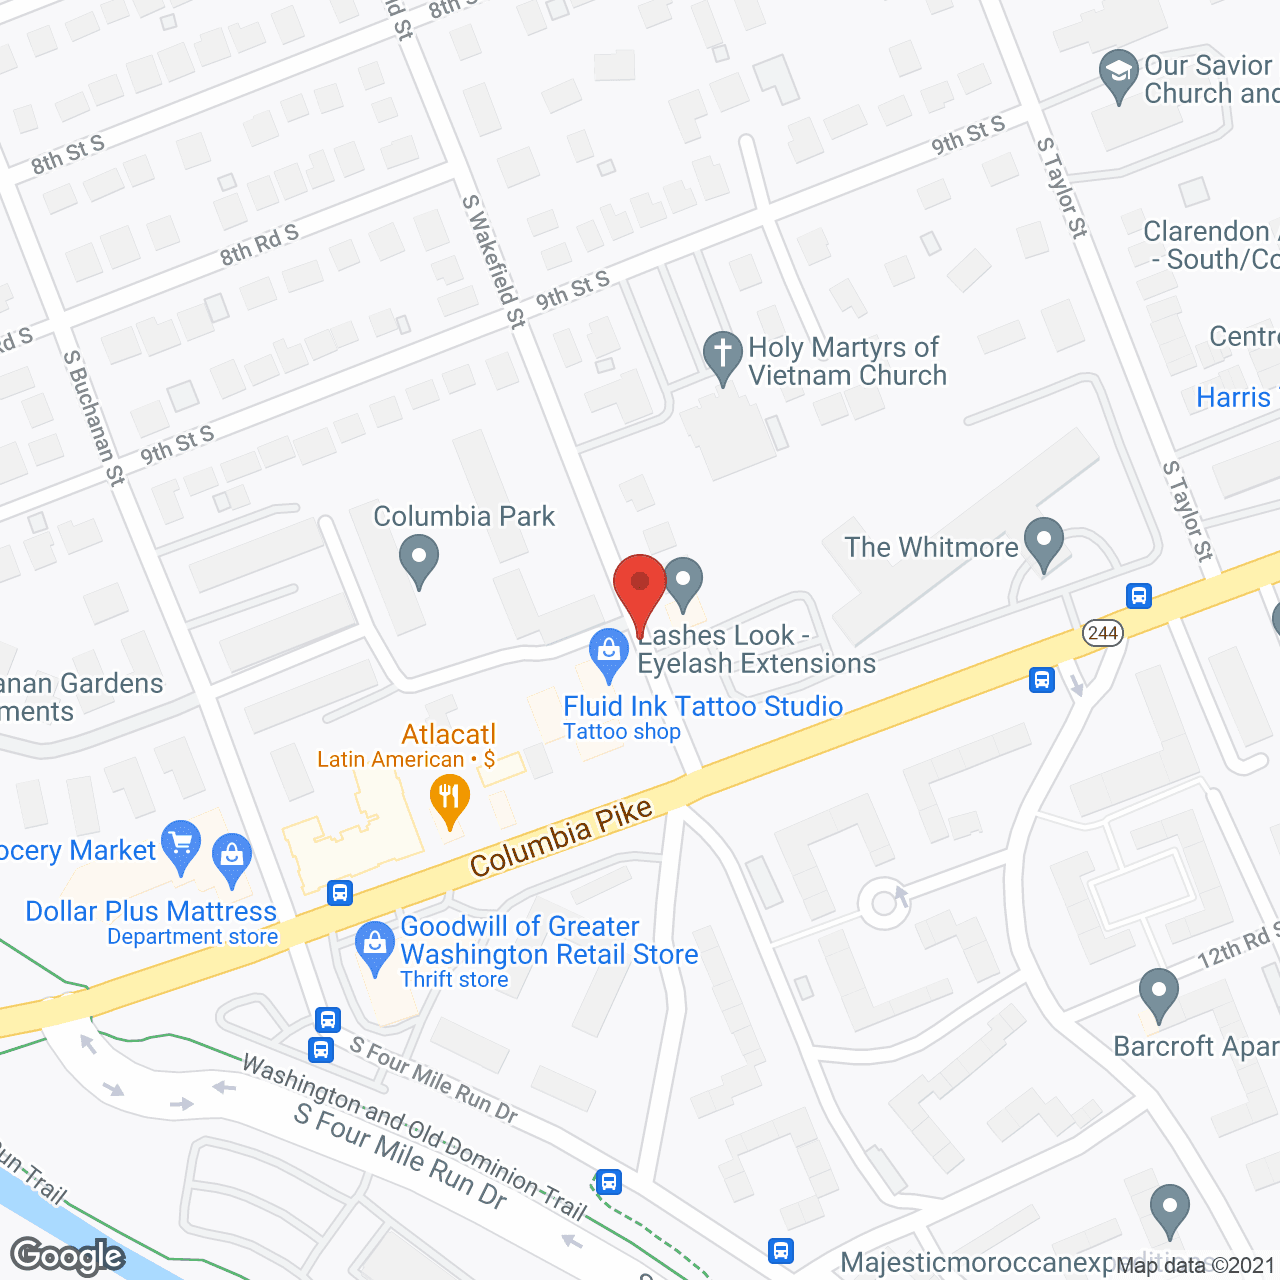 Quality Healthcare Services, Inc. in google map